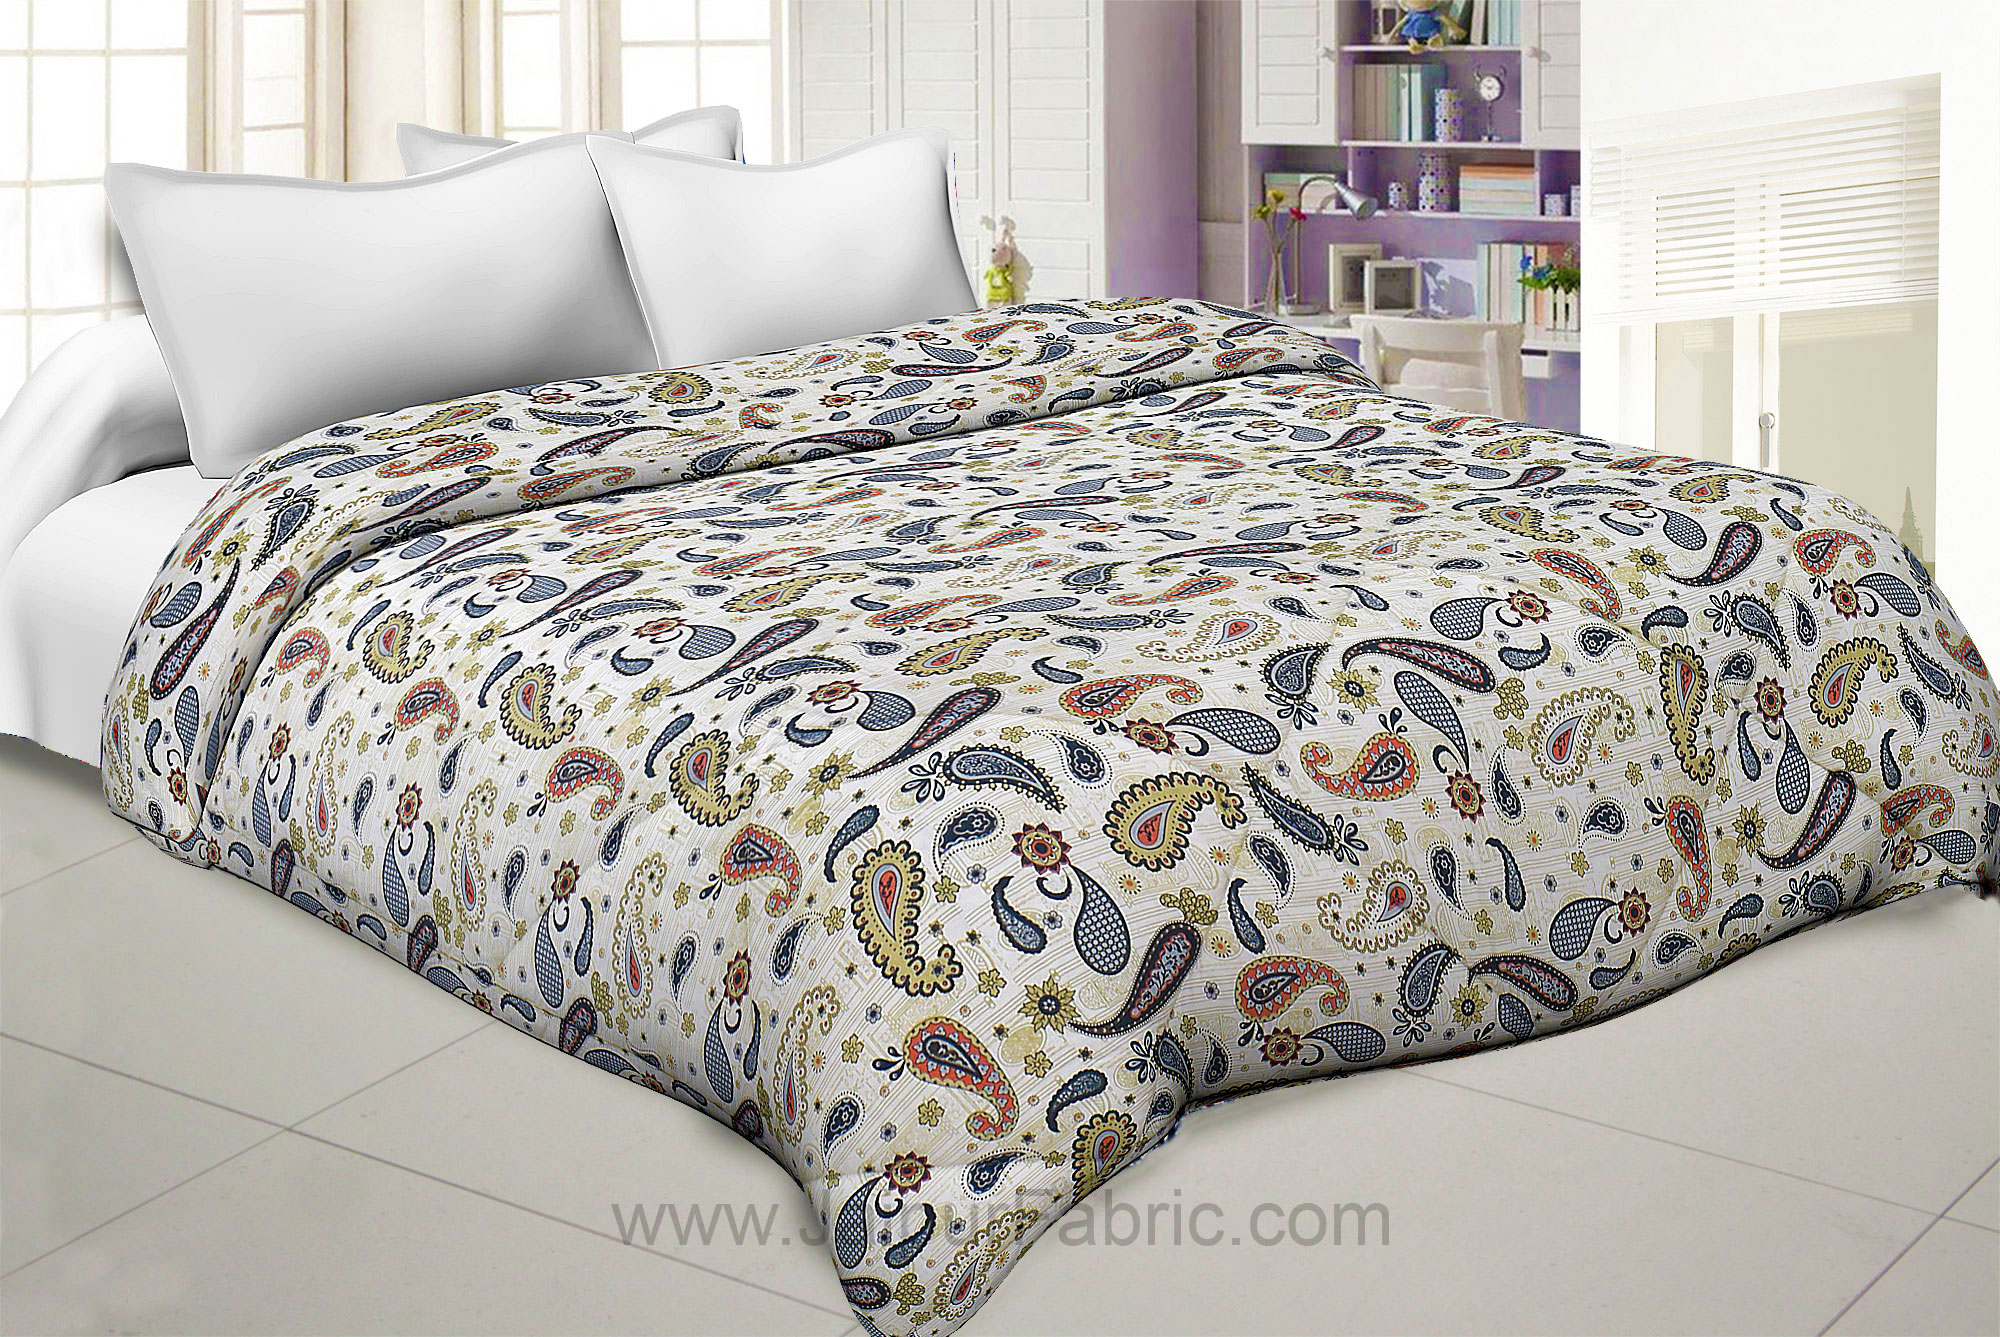 Paisley Creamish Green Double Bed Comforter